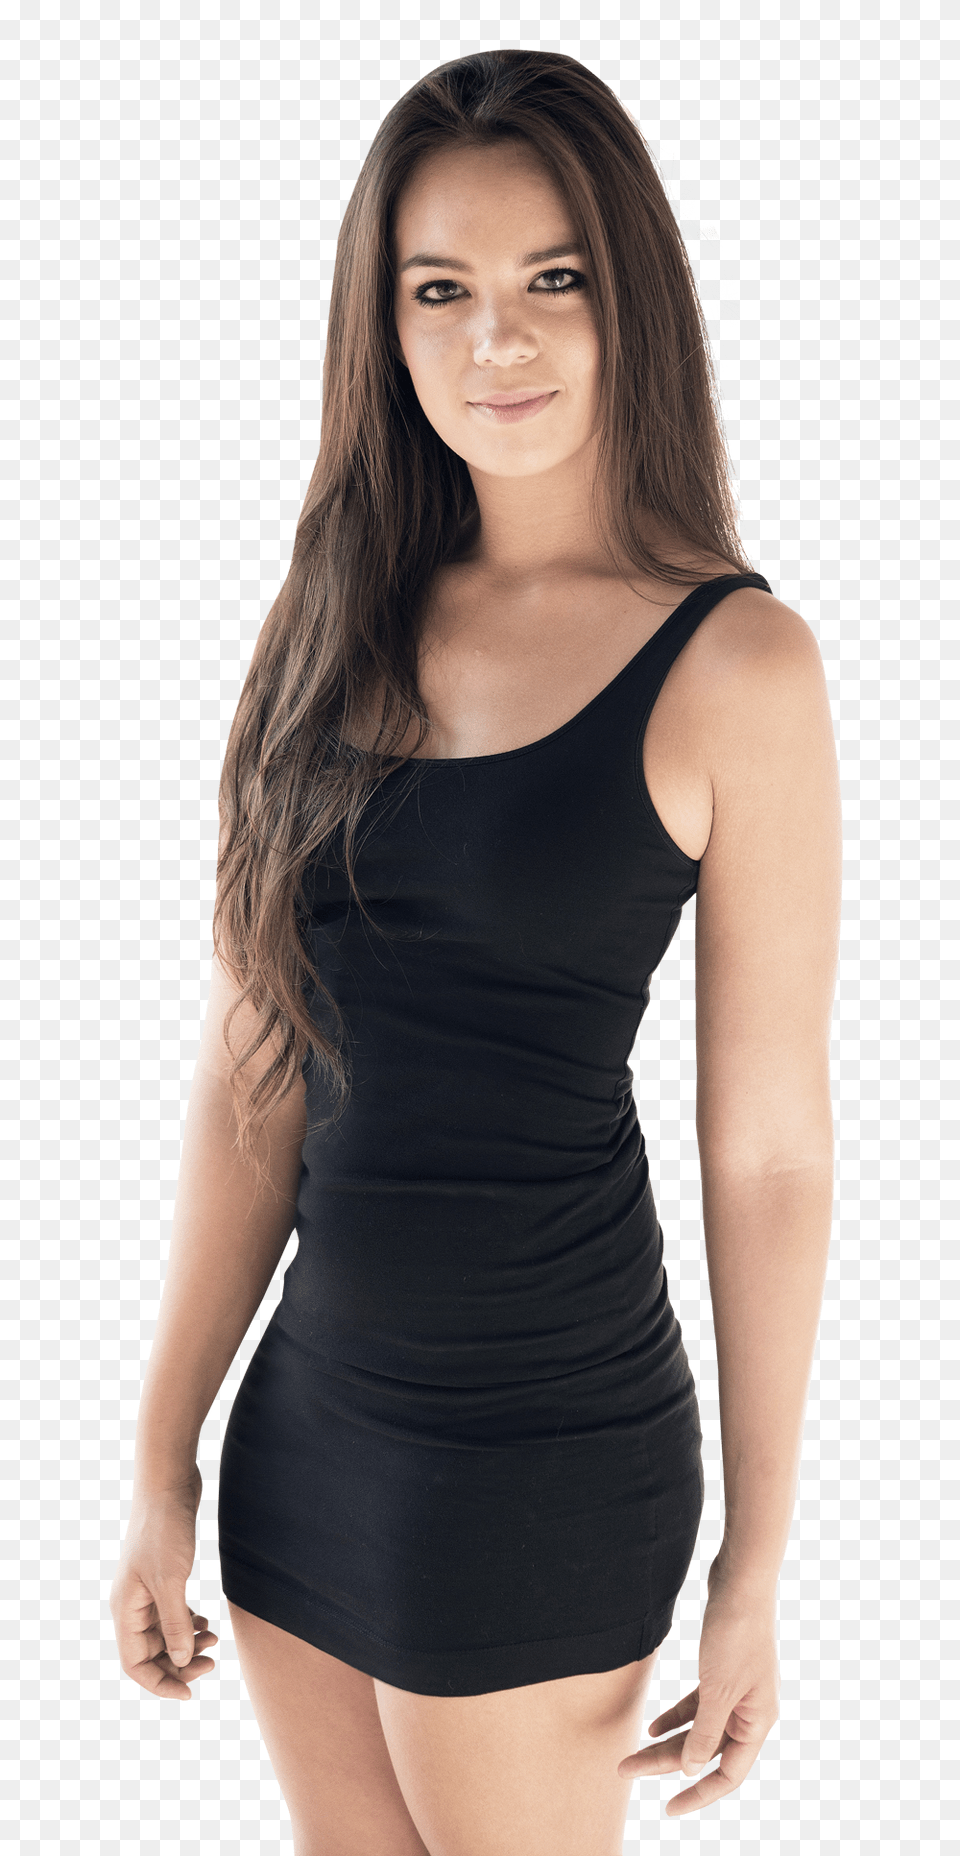 Pngpix Com Attractive Young Woman Standing Image, Clothing, Dress, Adult, Female Free Png